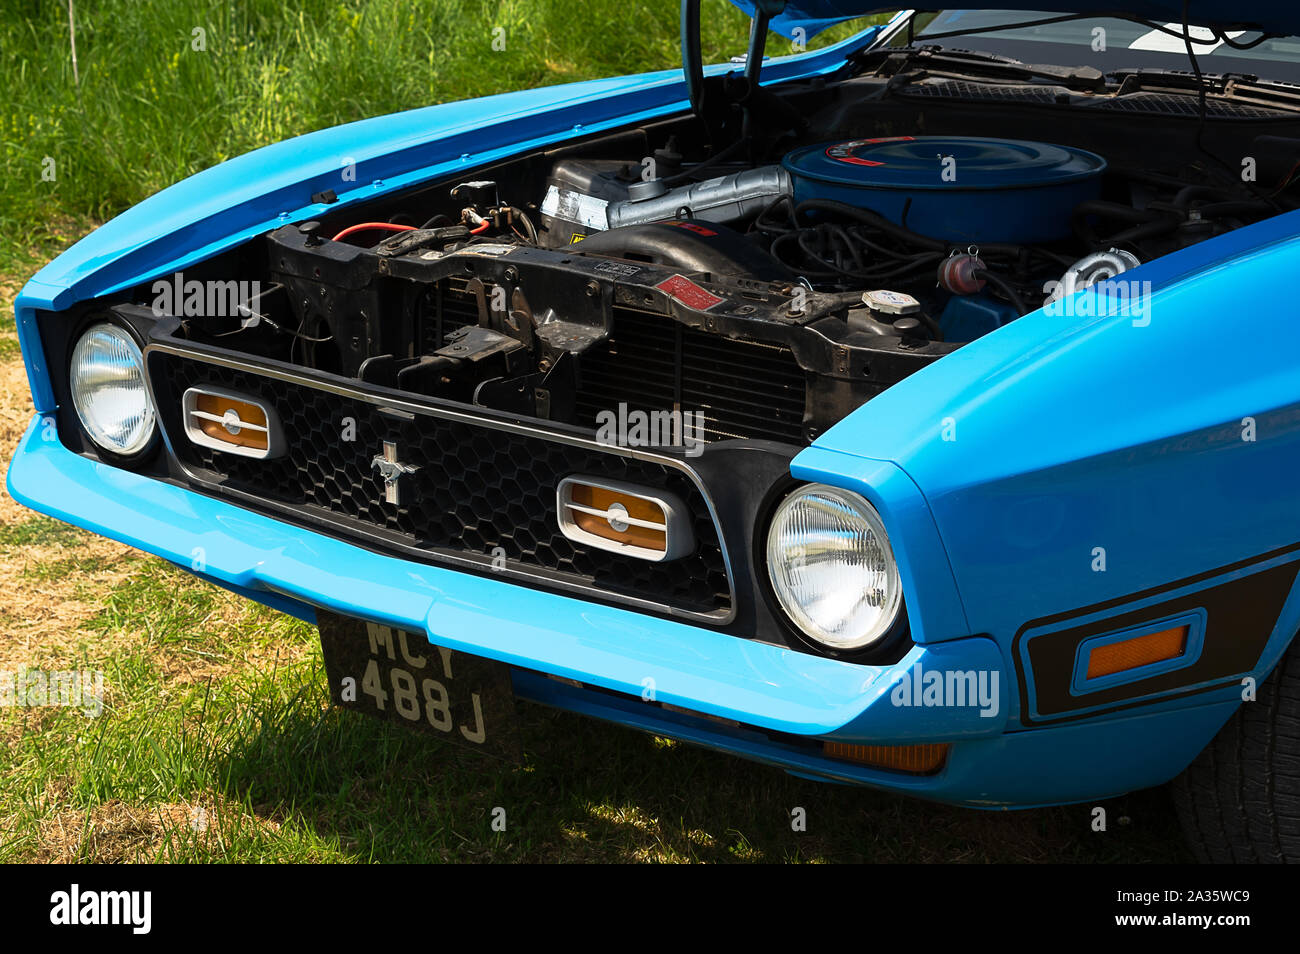 The front of a blue 1971 Ford Mustang on display at a car show Stock Photo